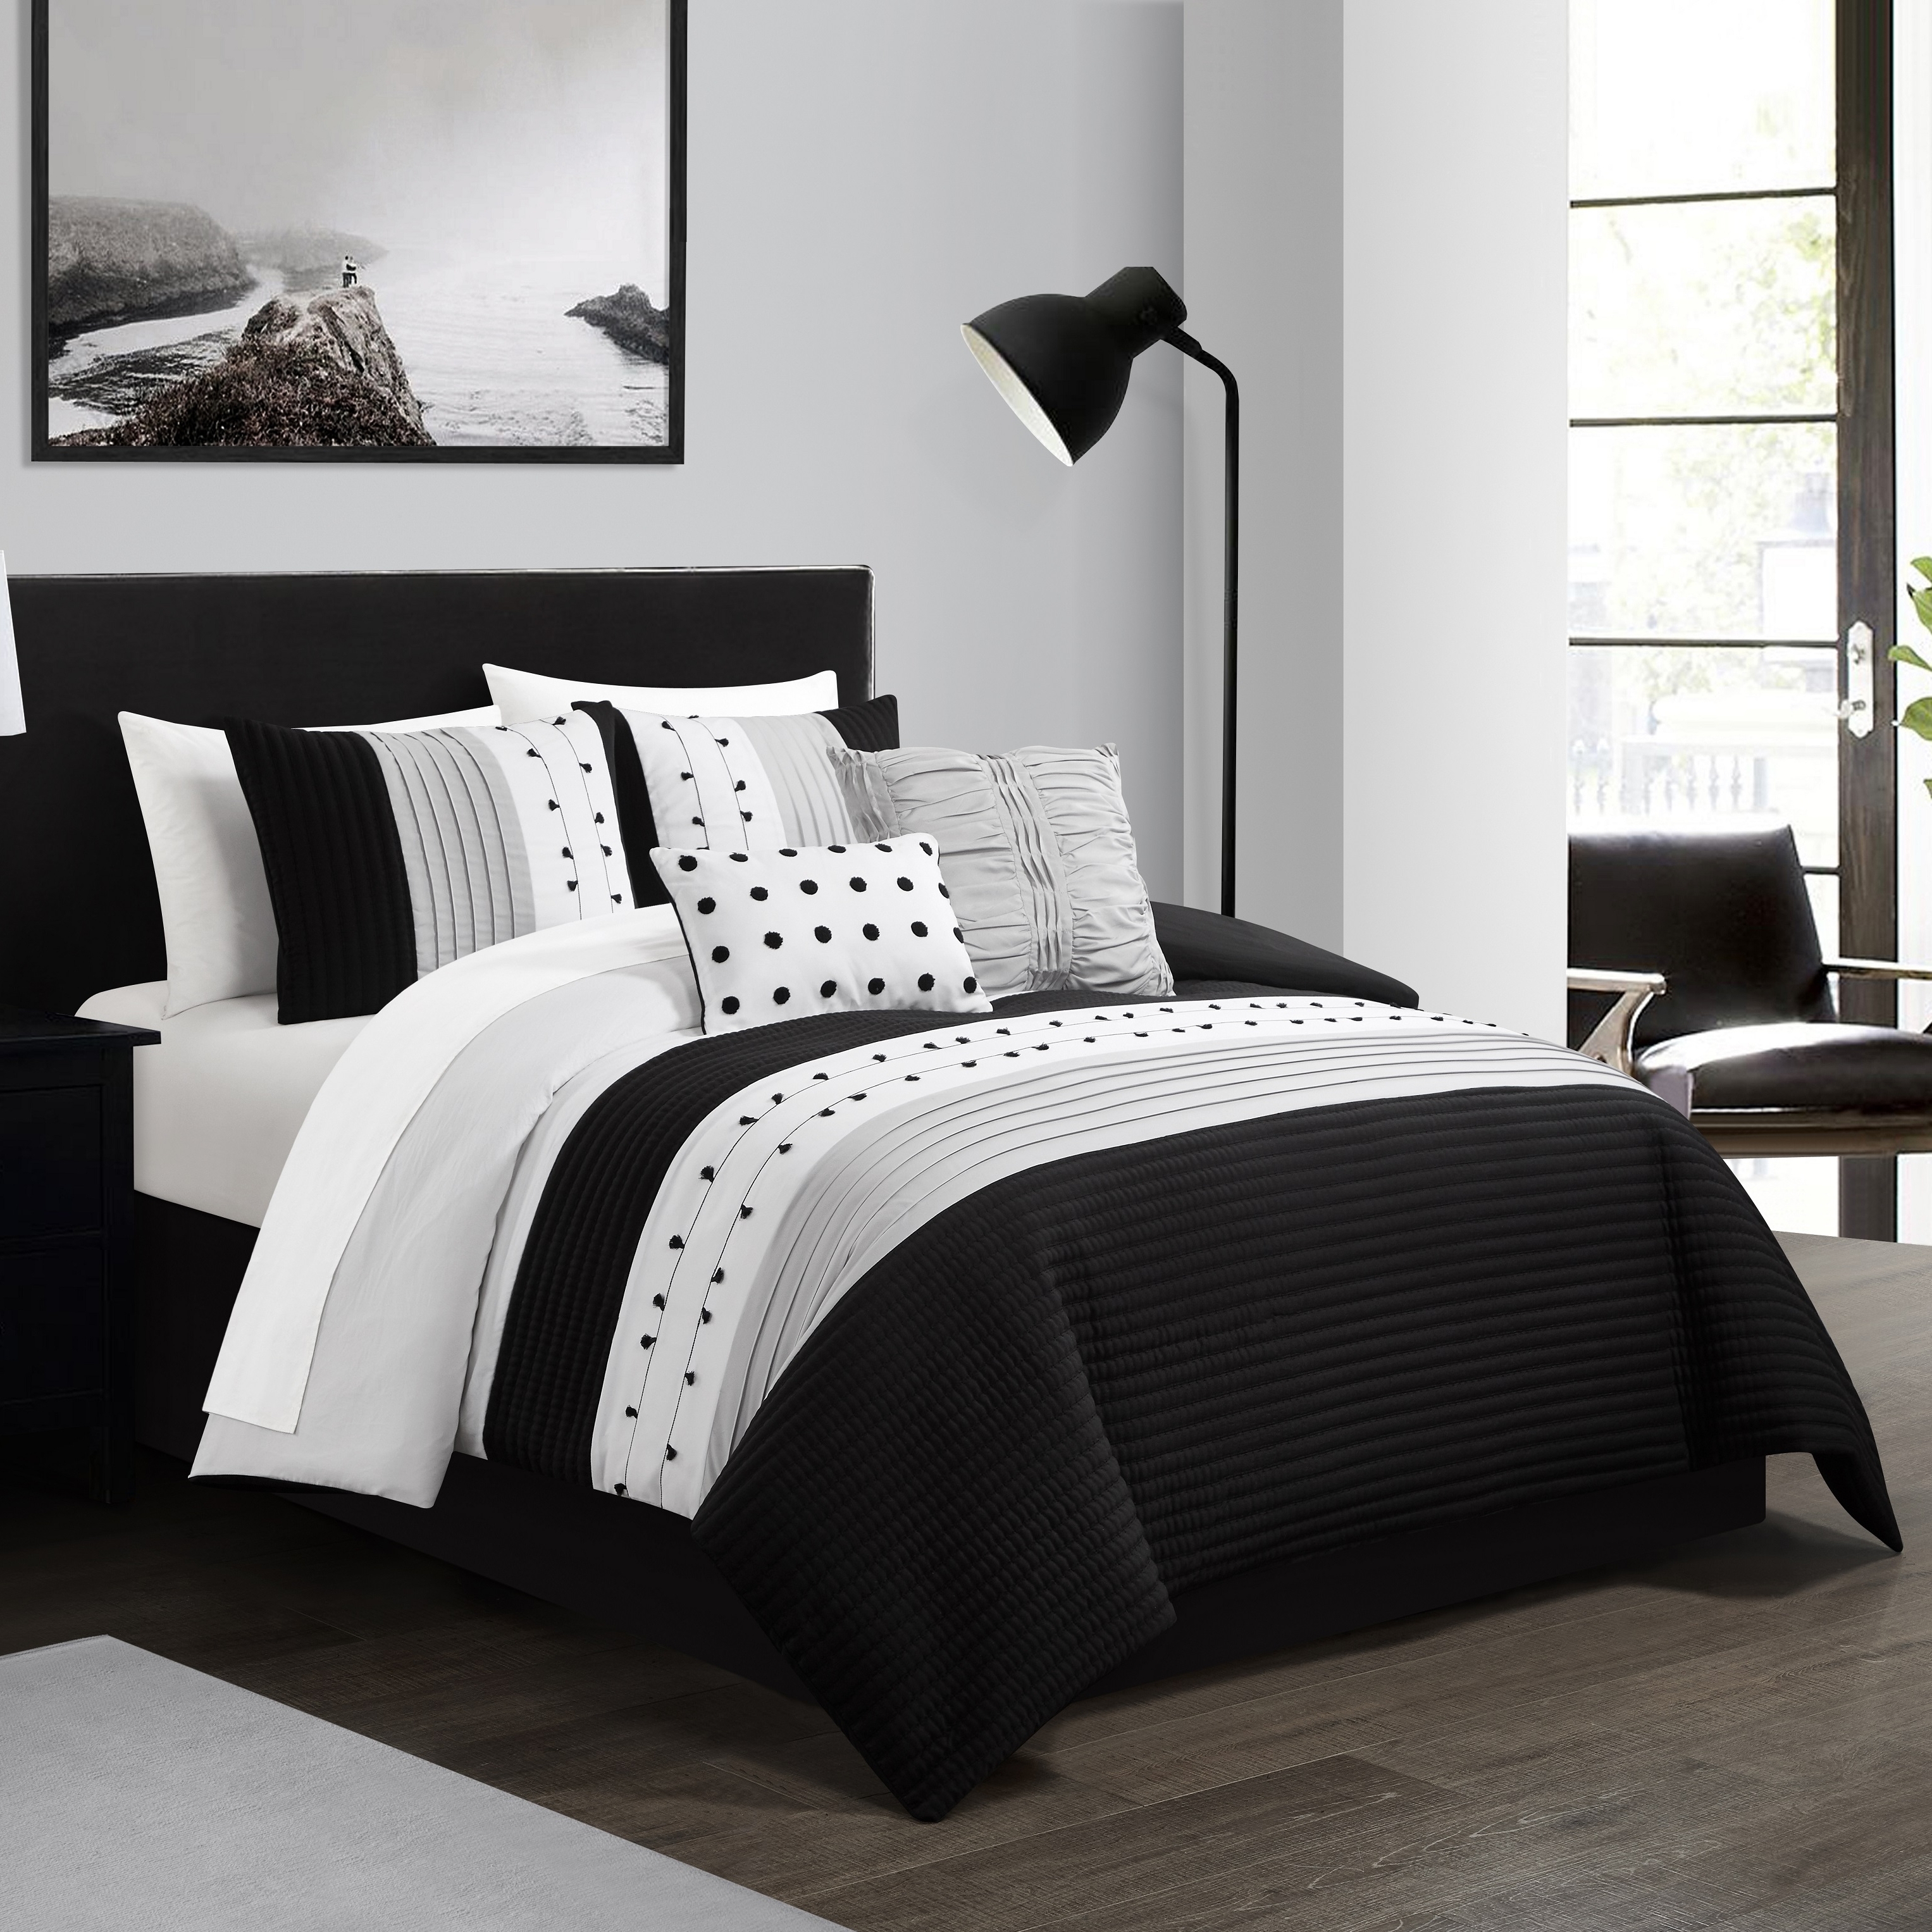 Lainy 5 Piece Comforter Set Color Block Pleated Ribbed Embroidered Bedding - Black, King